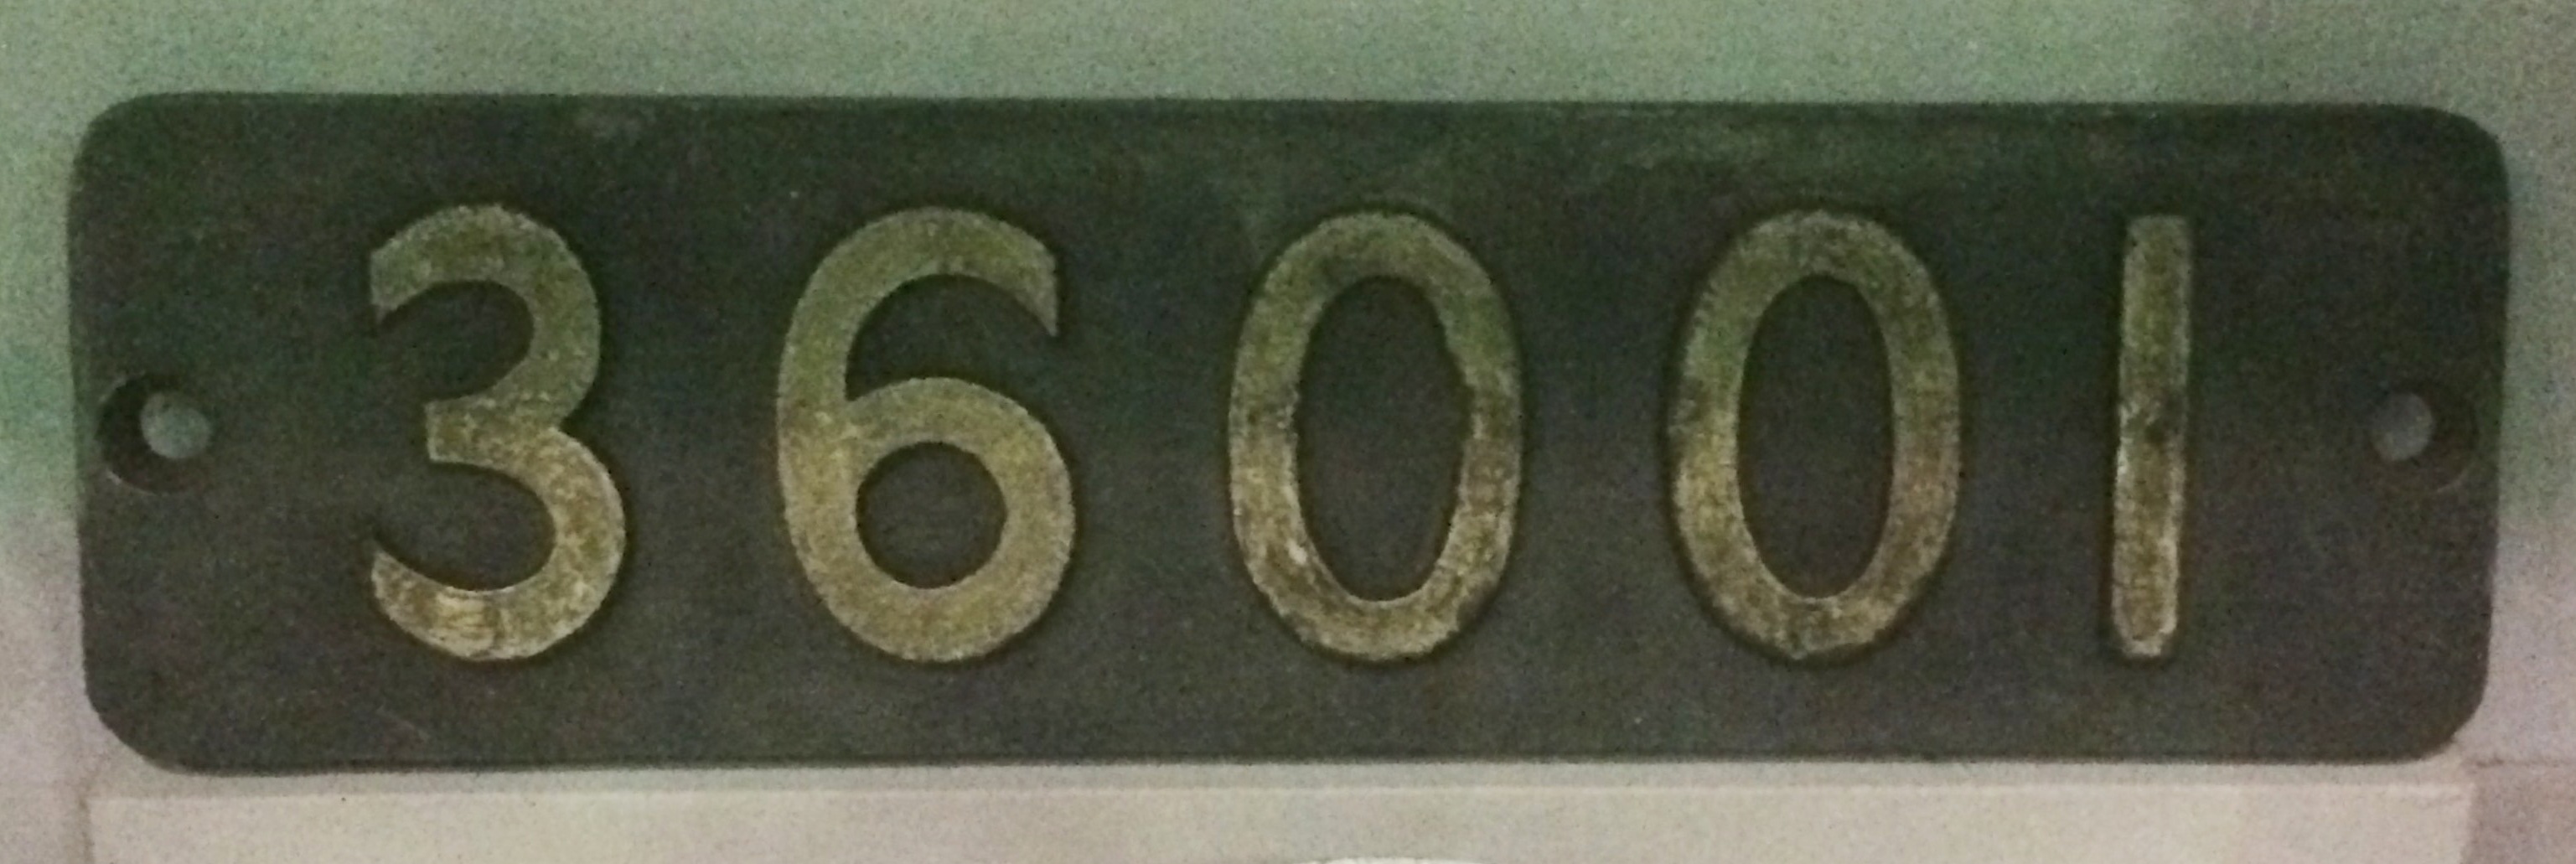 Smokebox number plate, No.36001, ex Southern Railway ‘Leader’ class prototype (1994-8836)